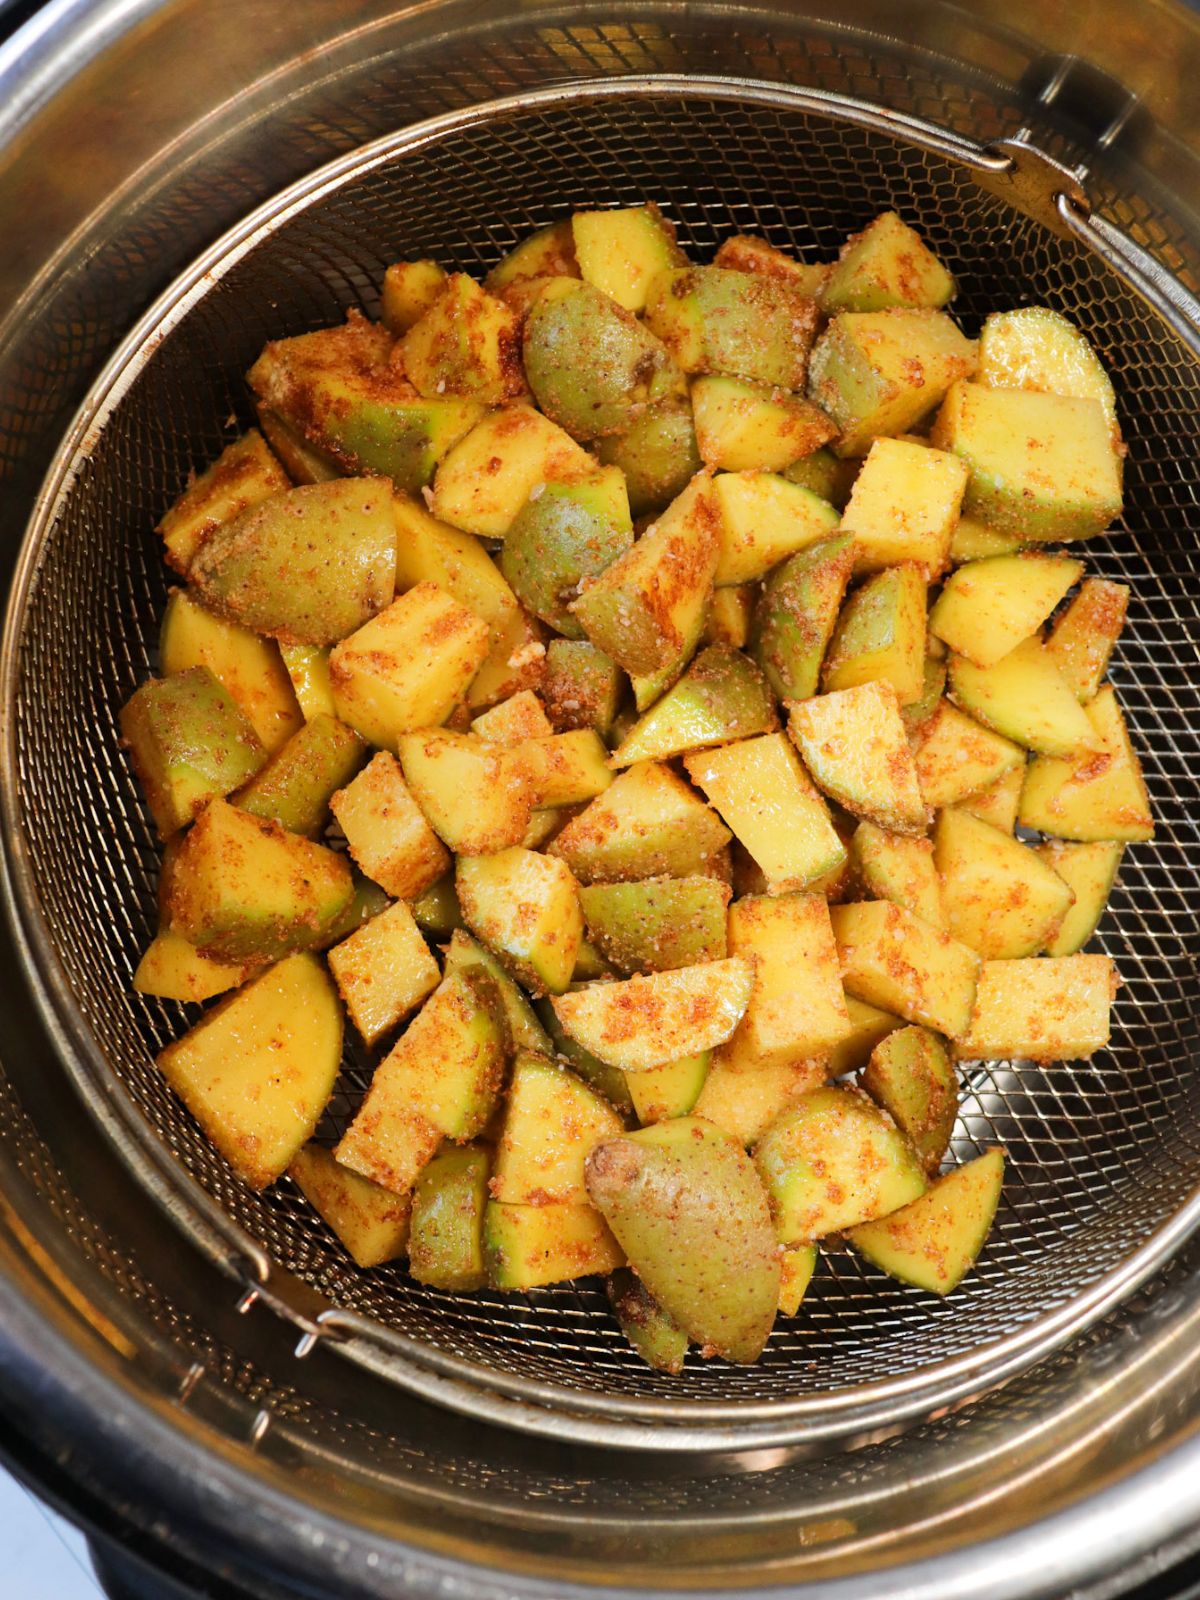 Oiled and seasoned diced potatoes in an air fryer basket before being air fried.